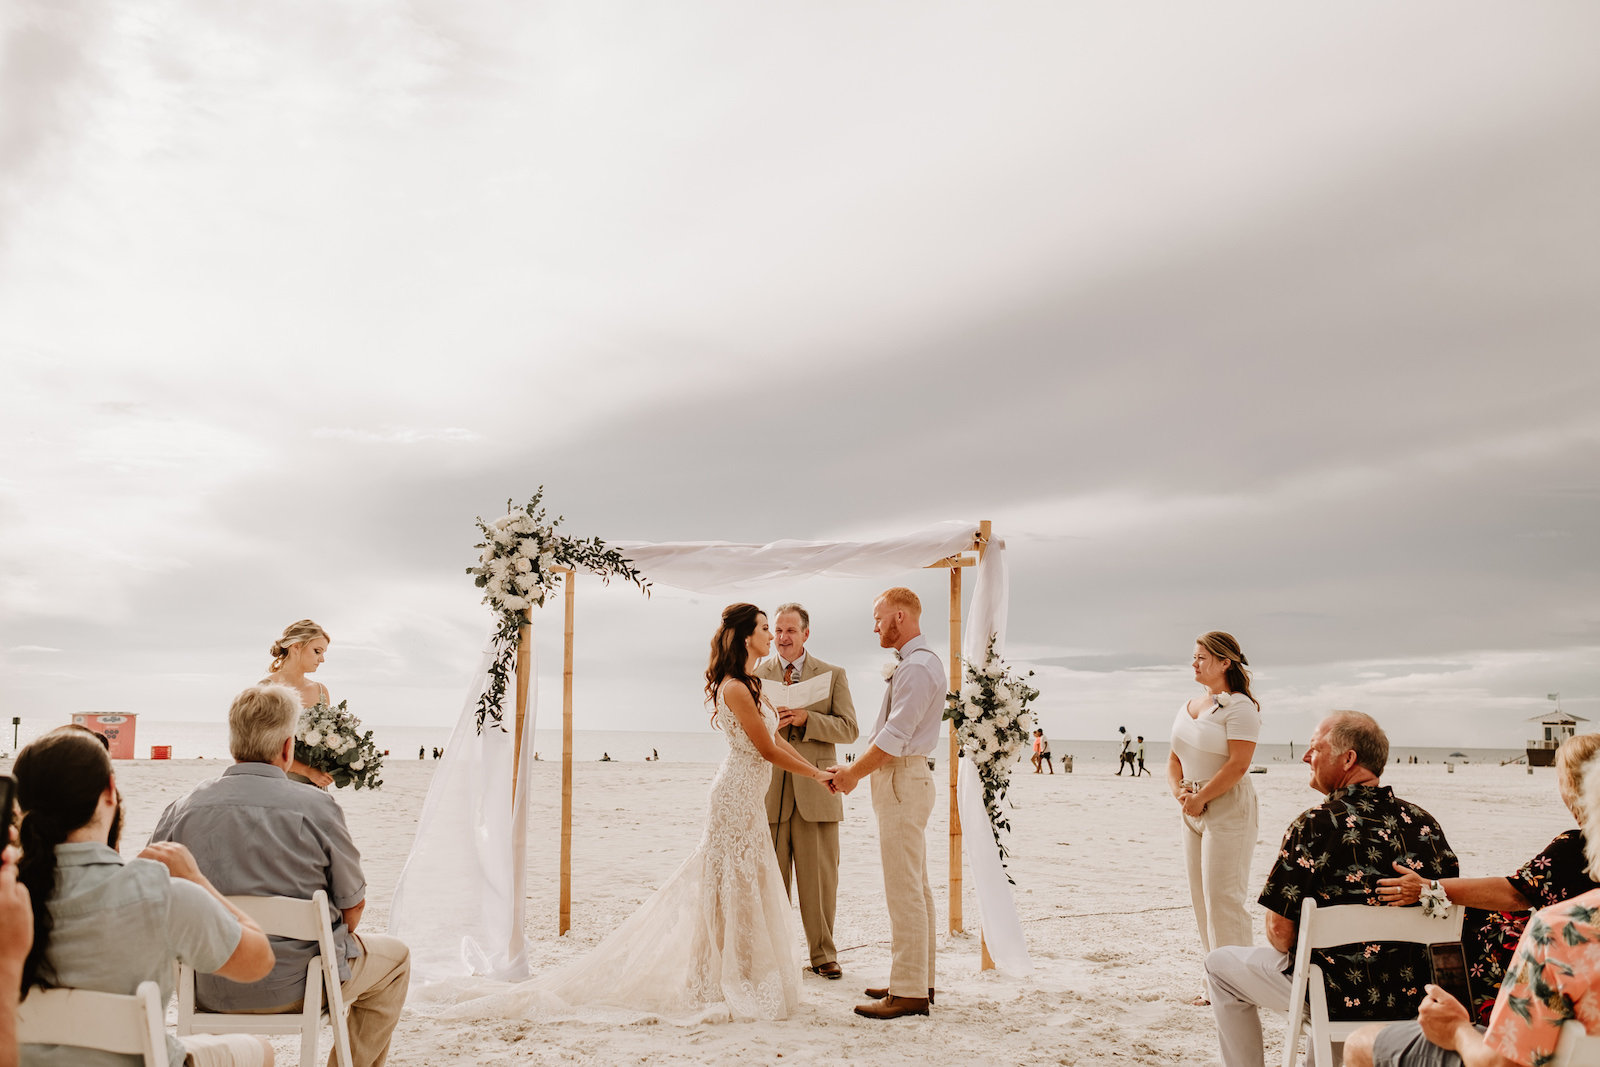 Beach Wedding Ceremony Venue at Hilton Clearwater Beach | White Folding Garden Chairs and Bamboo Arch with Sheer Draping and Greenery Floral Arrangement Tie Backs with White Roses